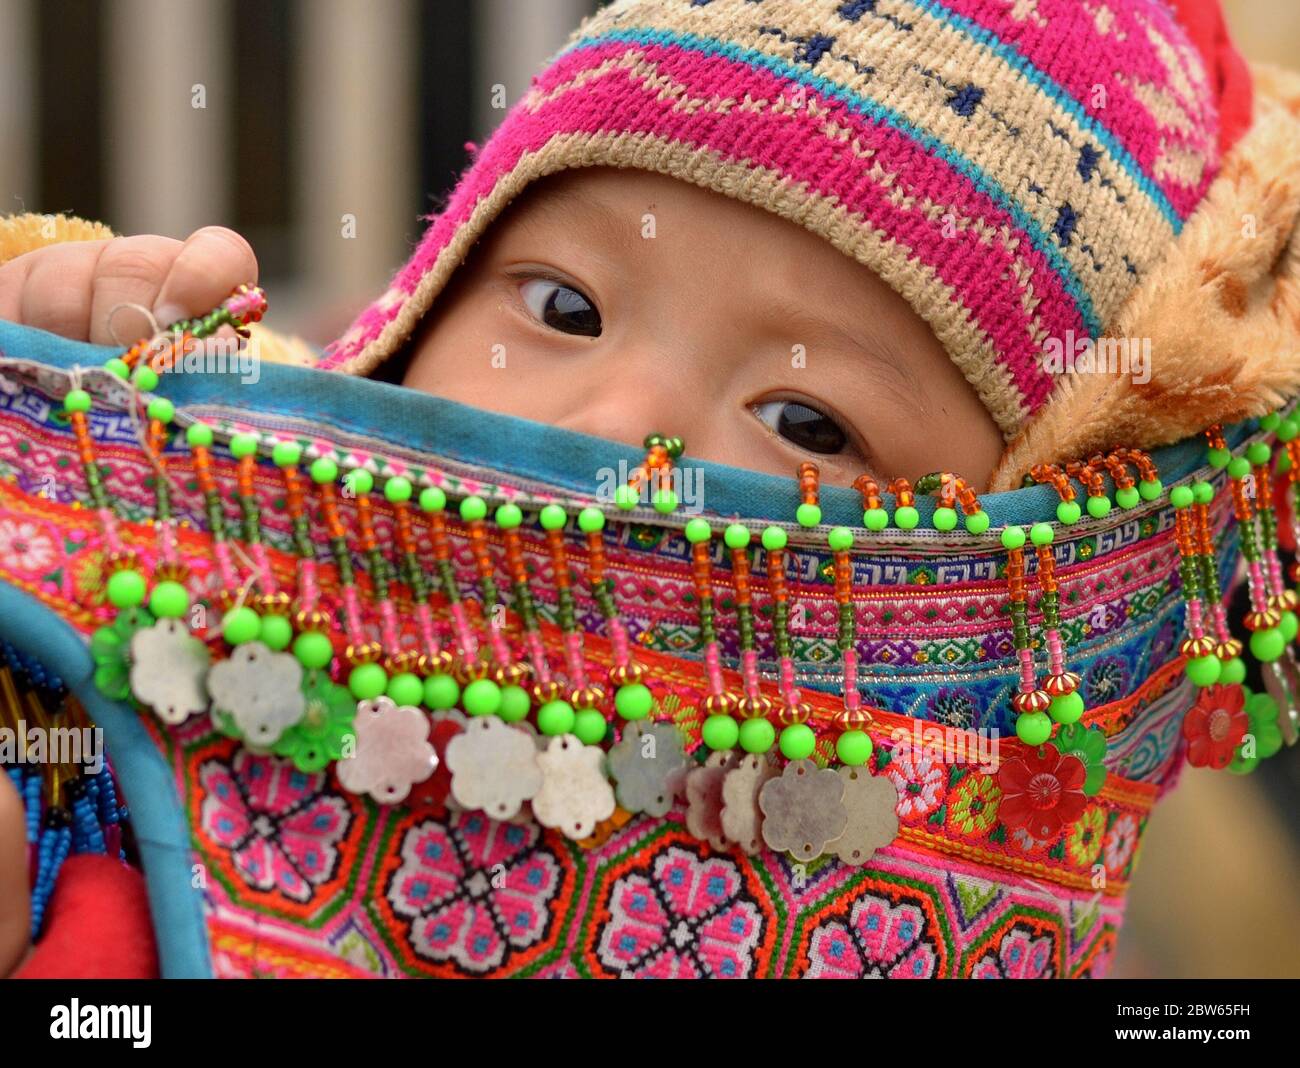 Cute Vietnamese Flower H’mong baby boy sits in an embroidered, traditional baby sling and looks at the camera. Stock Photo